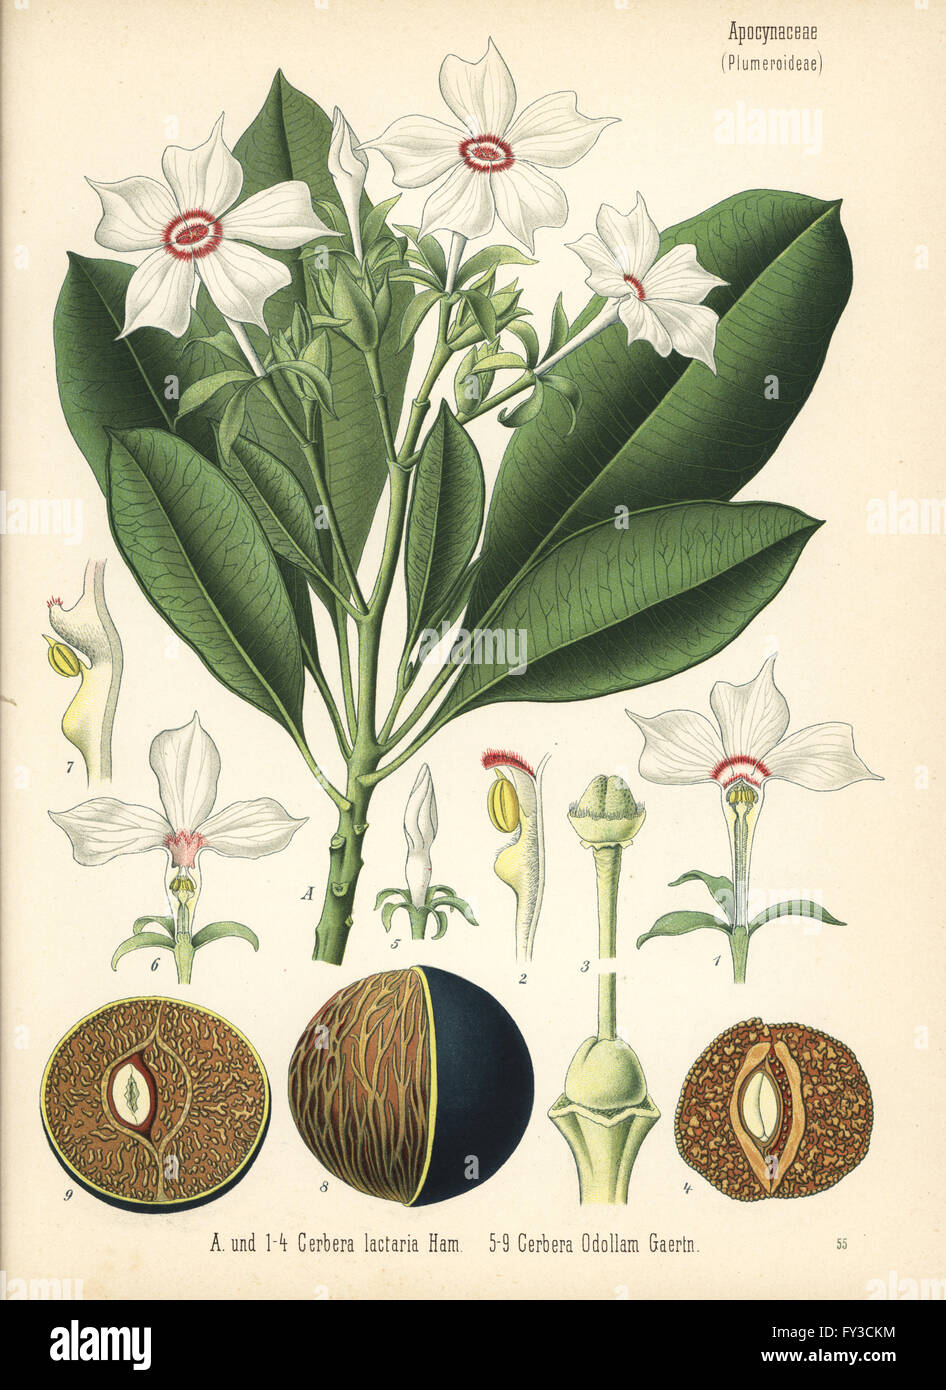 Suicide tree, pong-pong, and othalanga, Cerbera odollam (Cerbera lactaria). Chromolithograph after a botanical illustration from Hermann Adolph Koehler's Medicinal Plants, edited by Gustav Pabst, Koehler, Germany, 1887. Stock Photo